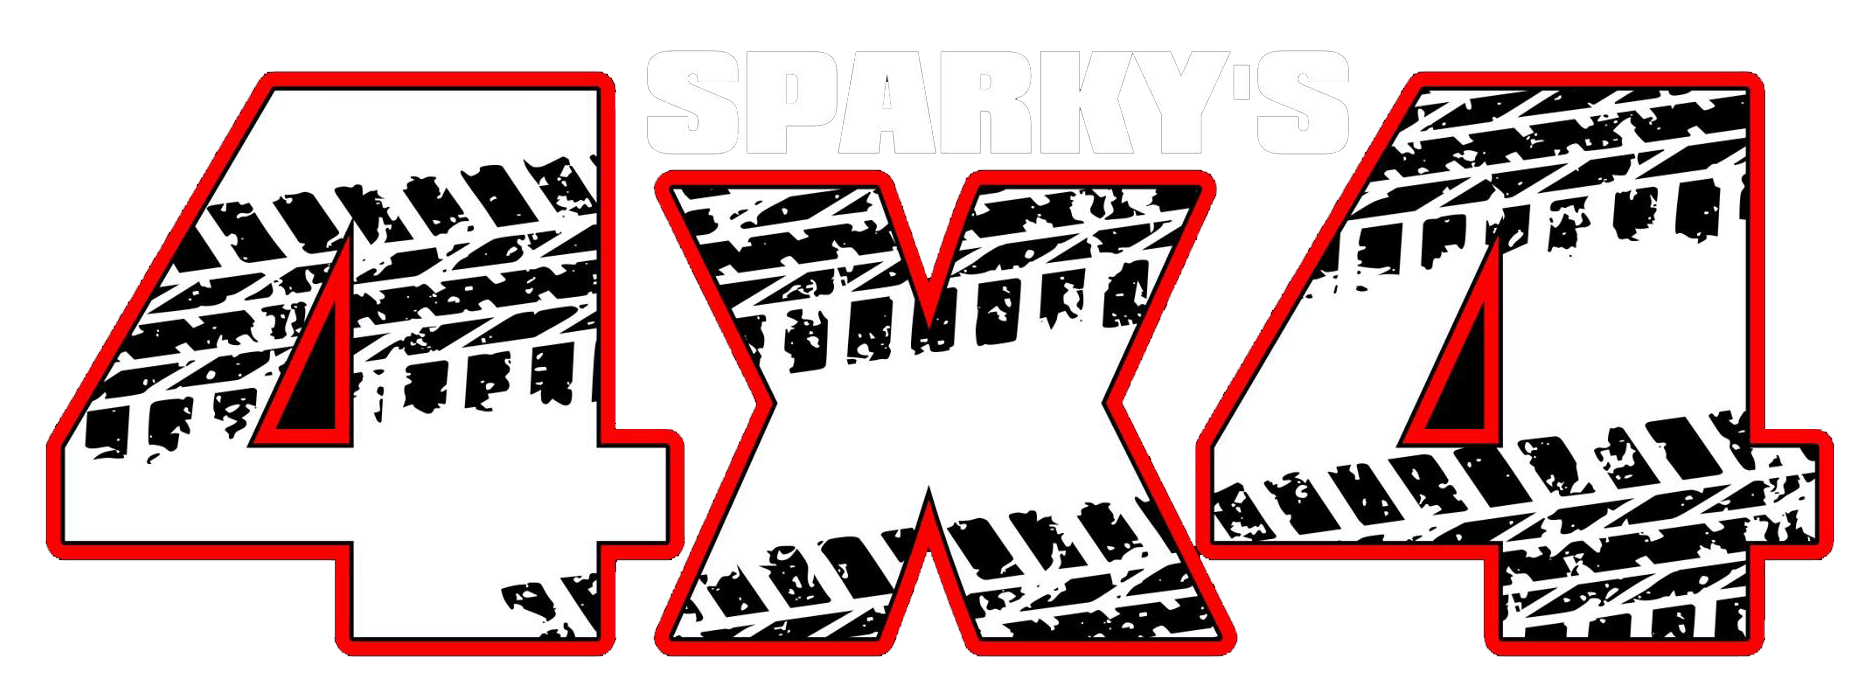 Sparky's 4x4 Auto Electrical: Servicing 4x4s in Tamworth